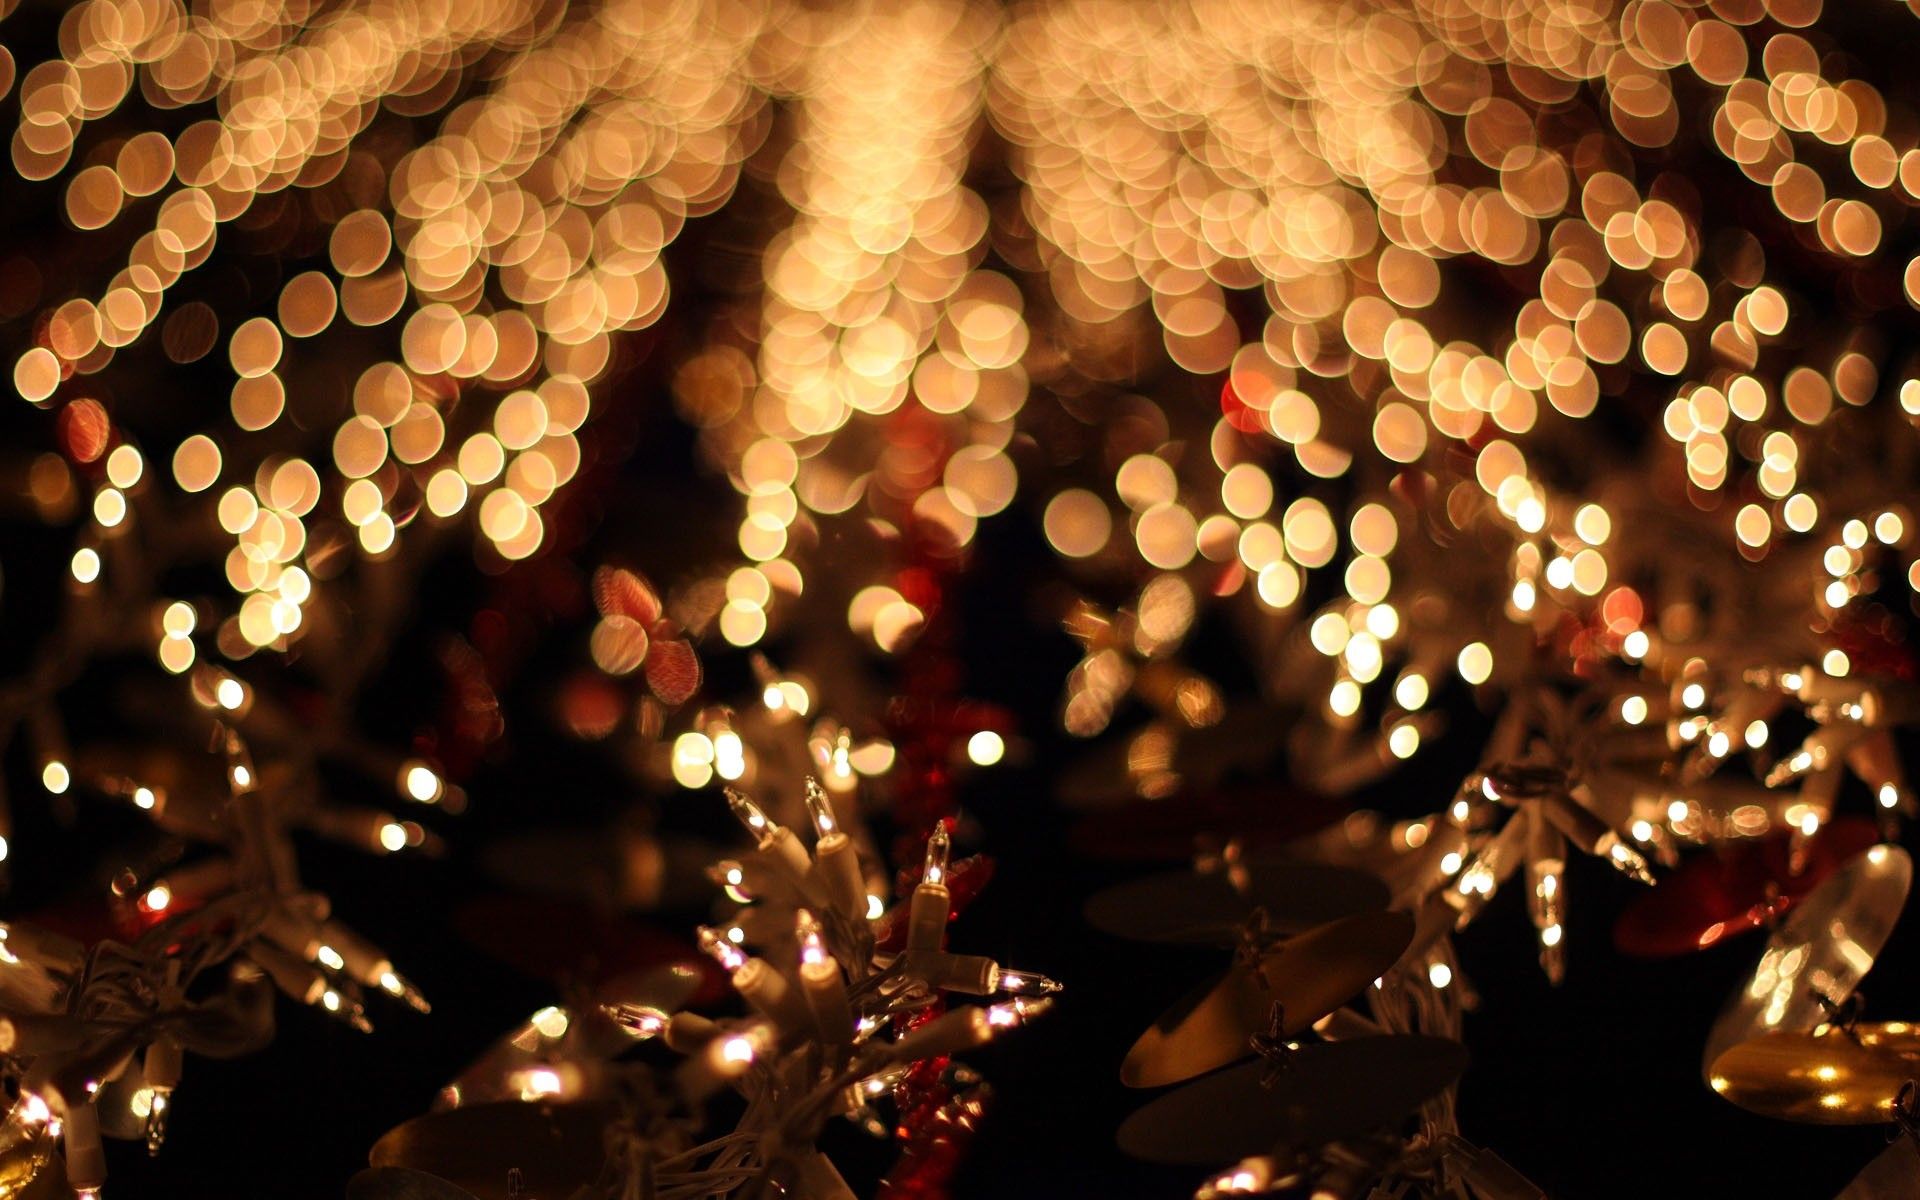 A string of lights on a dark background. - Christmas lights